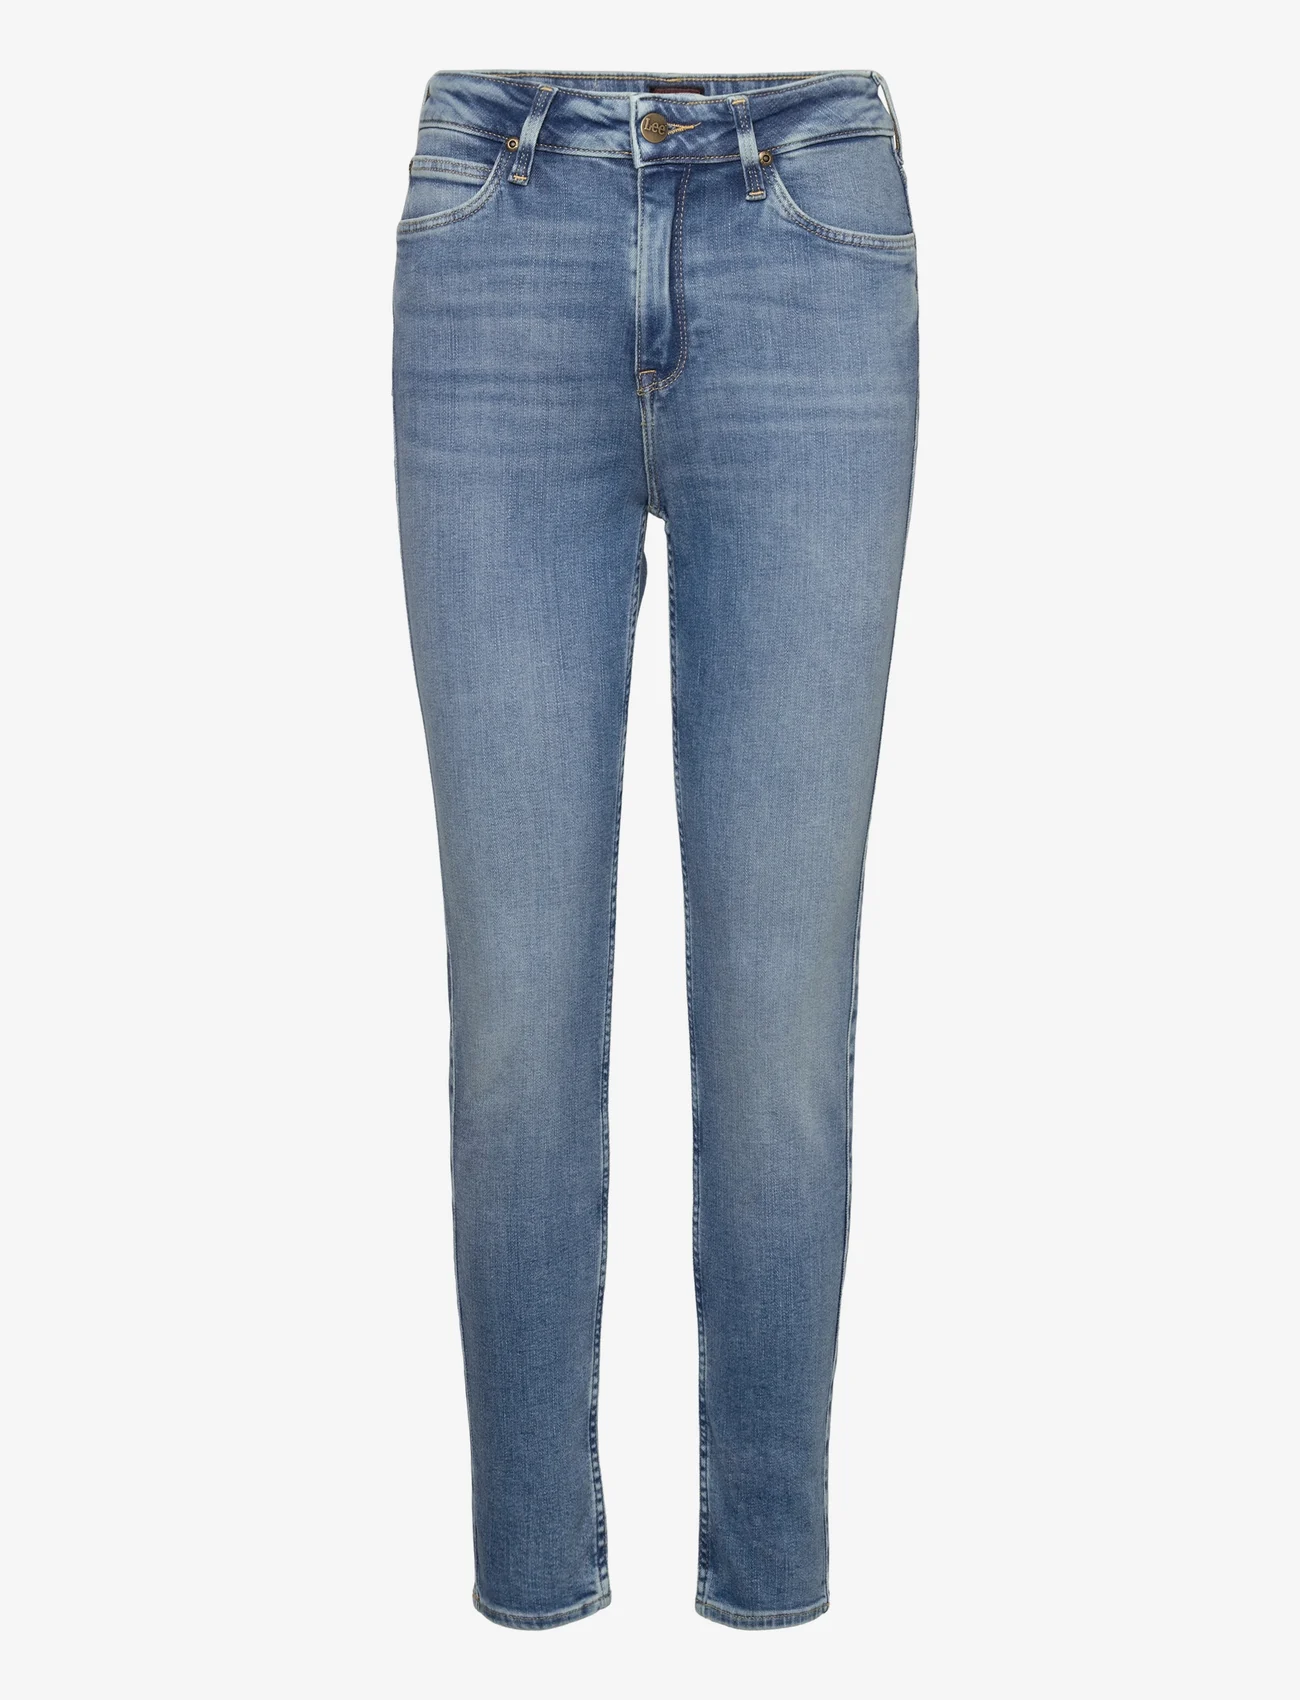 Lee Jeans - SCARLETT HIGH - skinny jeans - bright storms - 0